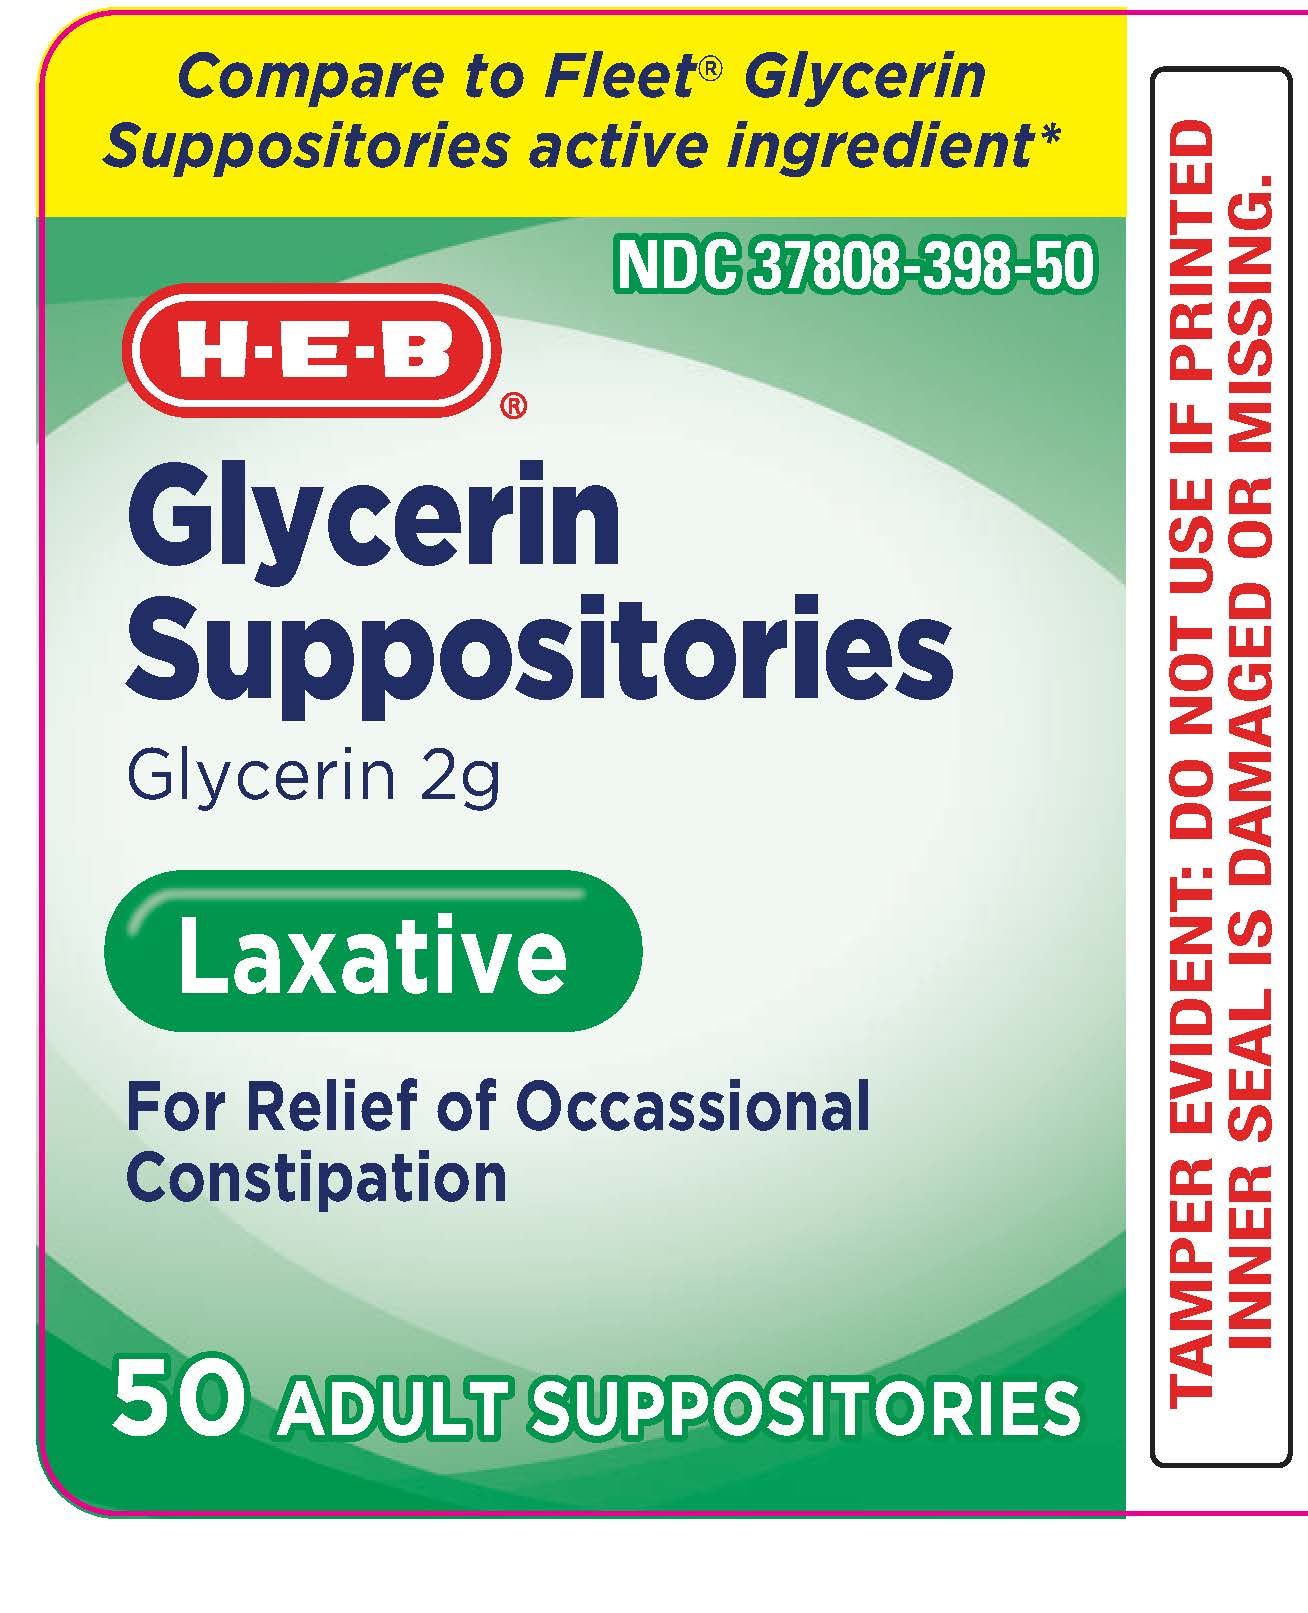 Glycerin suppositories for constipation – for adults and children